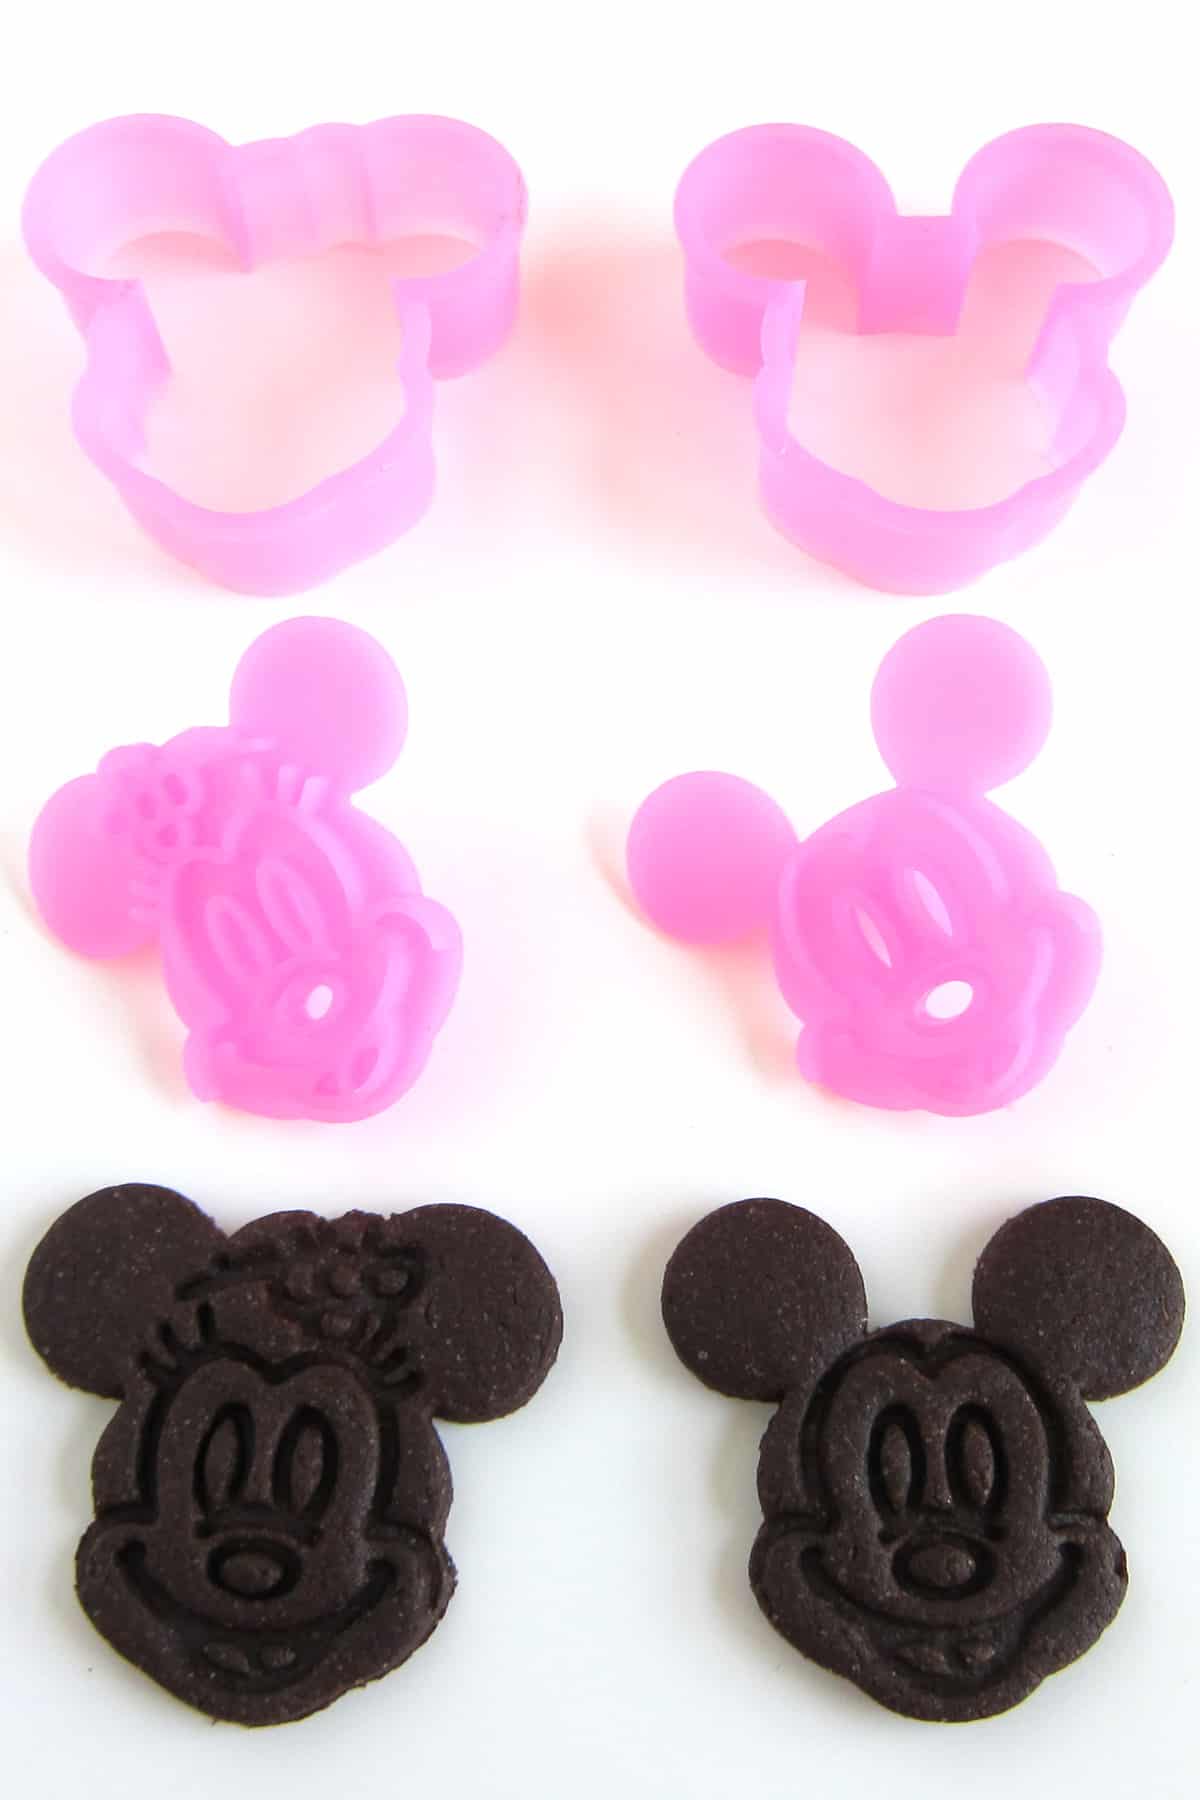 Minnie Mouse Cookies and Mickey Mouse Cookies made using 2-piece cookie cutters with stamps